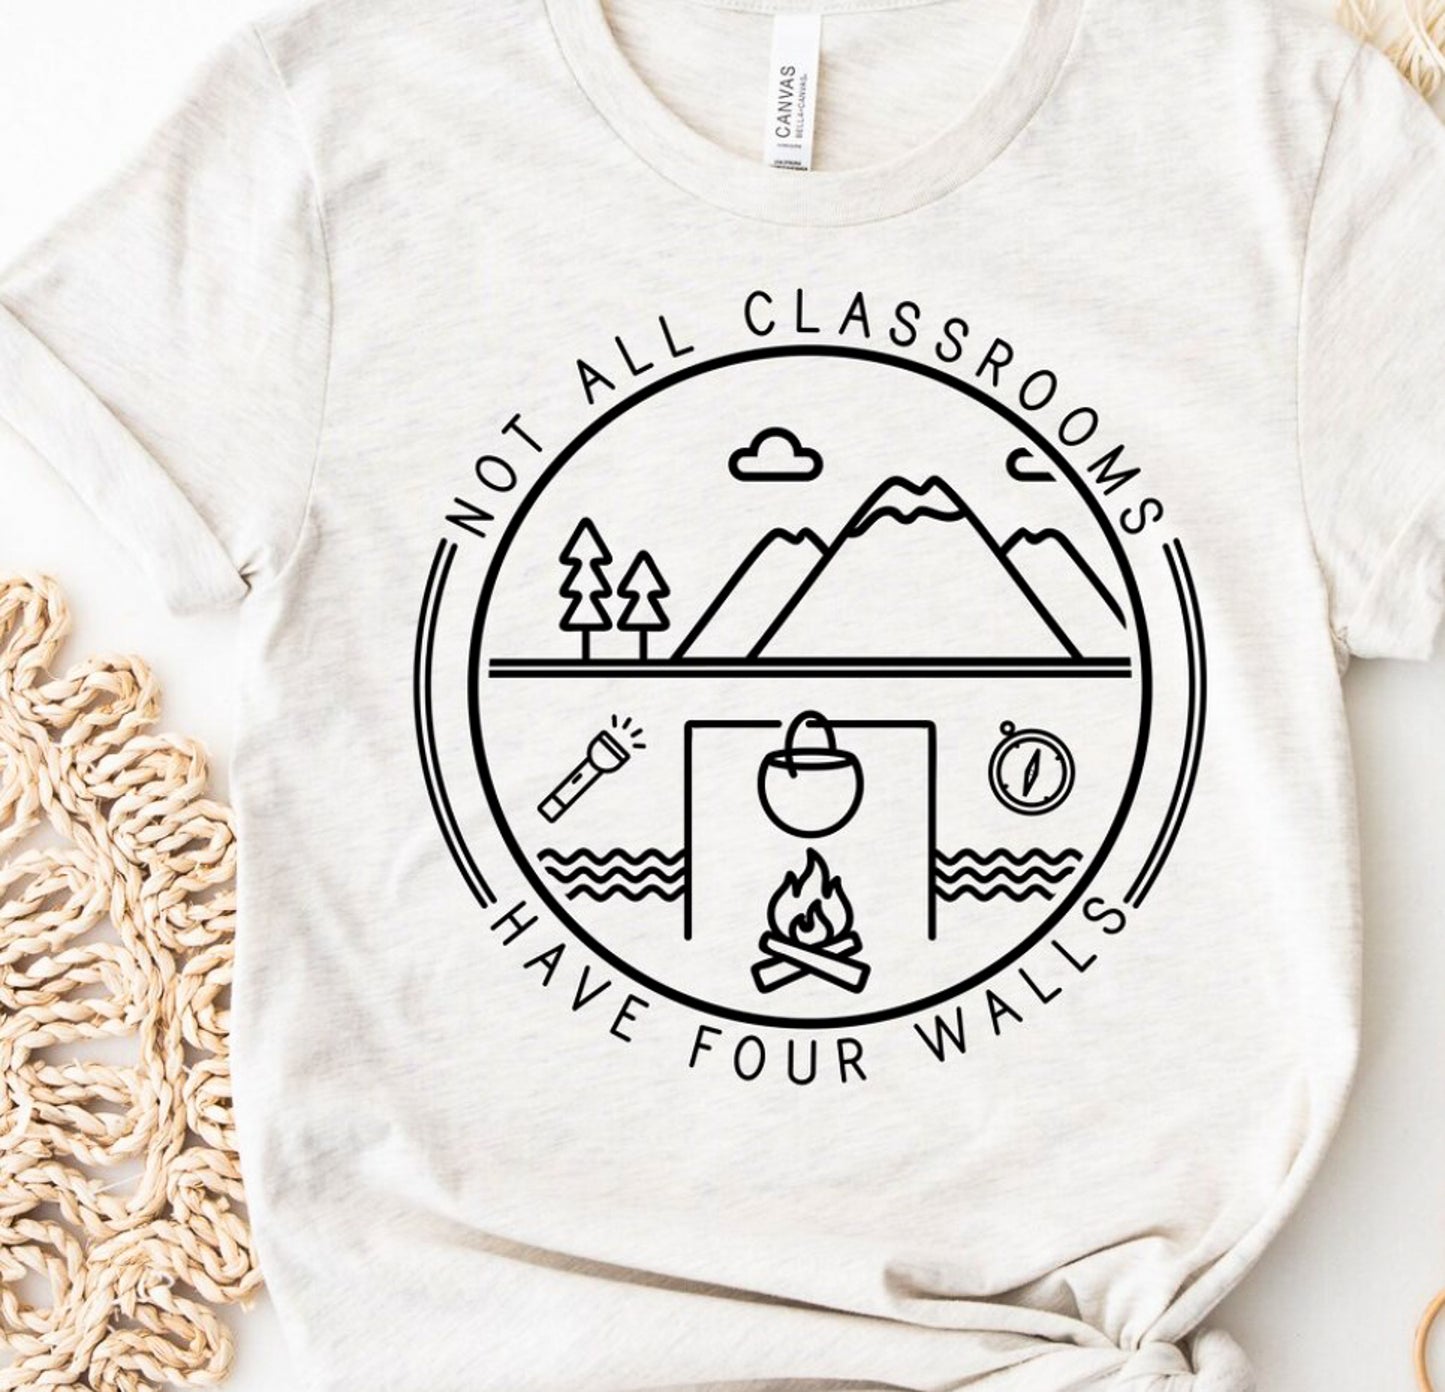 Not All Classrooms Have Four Walls Tee